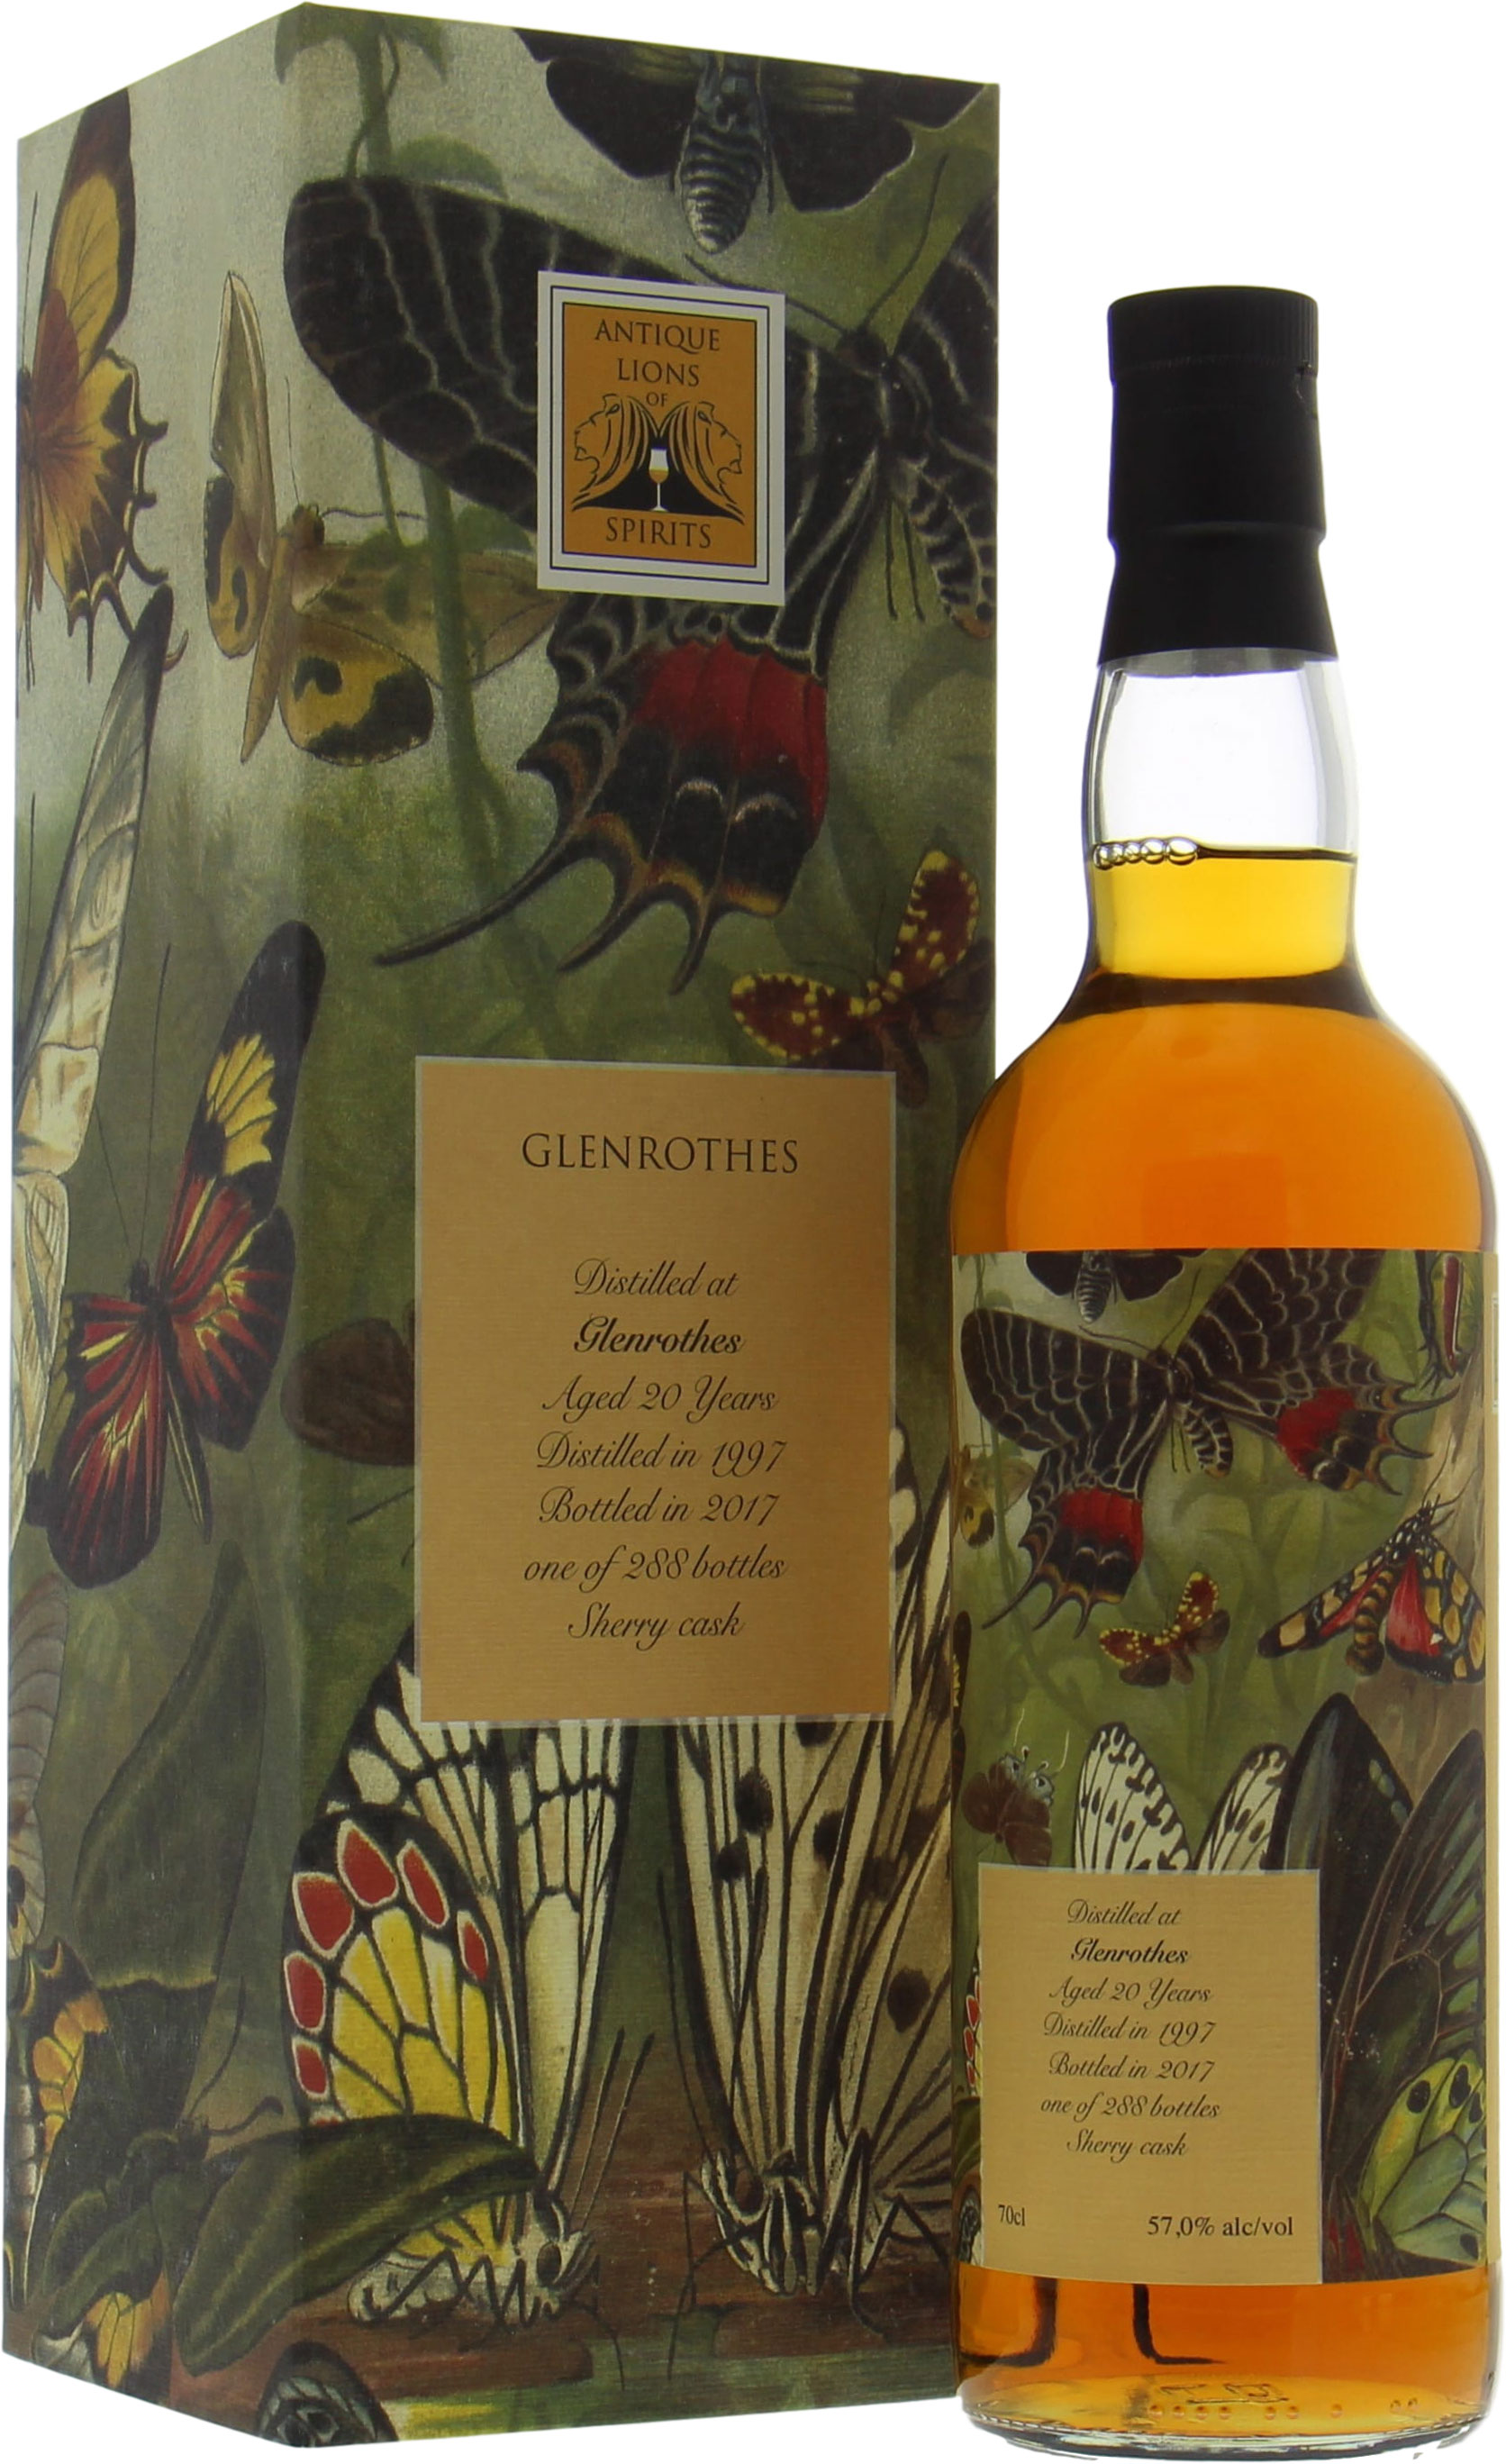 Glenrothes - 20 Years Old Antique Lions of Spirits The Butterflies 57% 1997